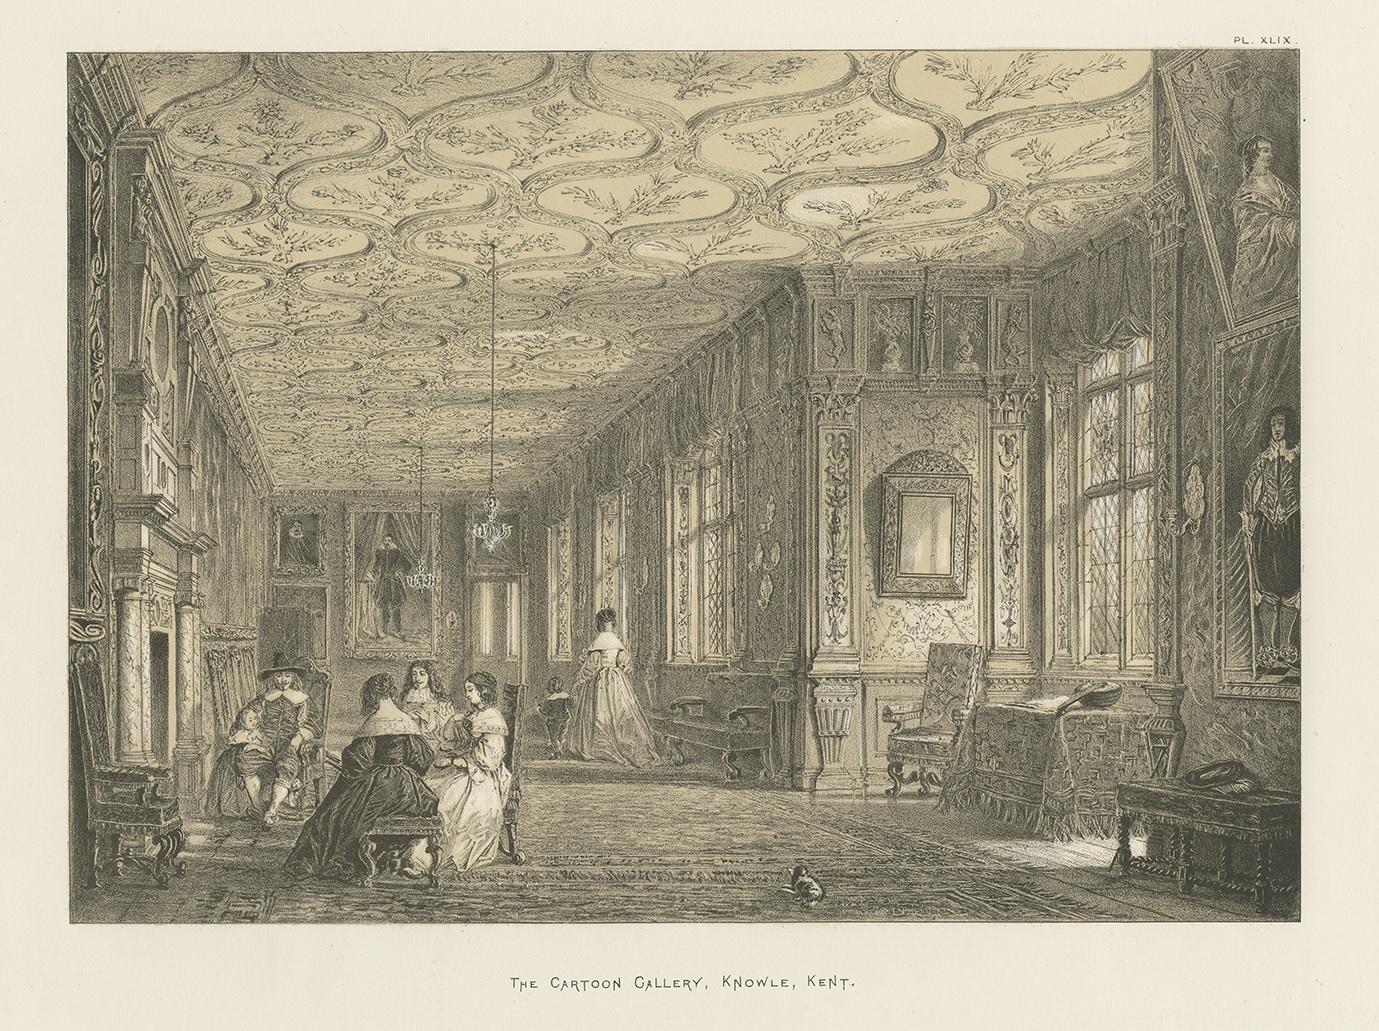 Antique print titled 'The Cartoon Gallery. Knowle. Kent'. Lithograph of the cartoon gallery of Knole, a country house and former Archbishop's Palace. This print originates from 'The Mansions of England in the Olden Time' by Joseph Nash.